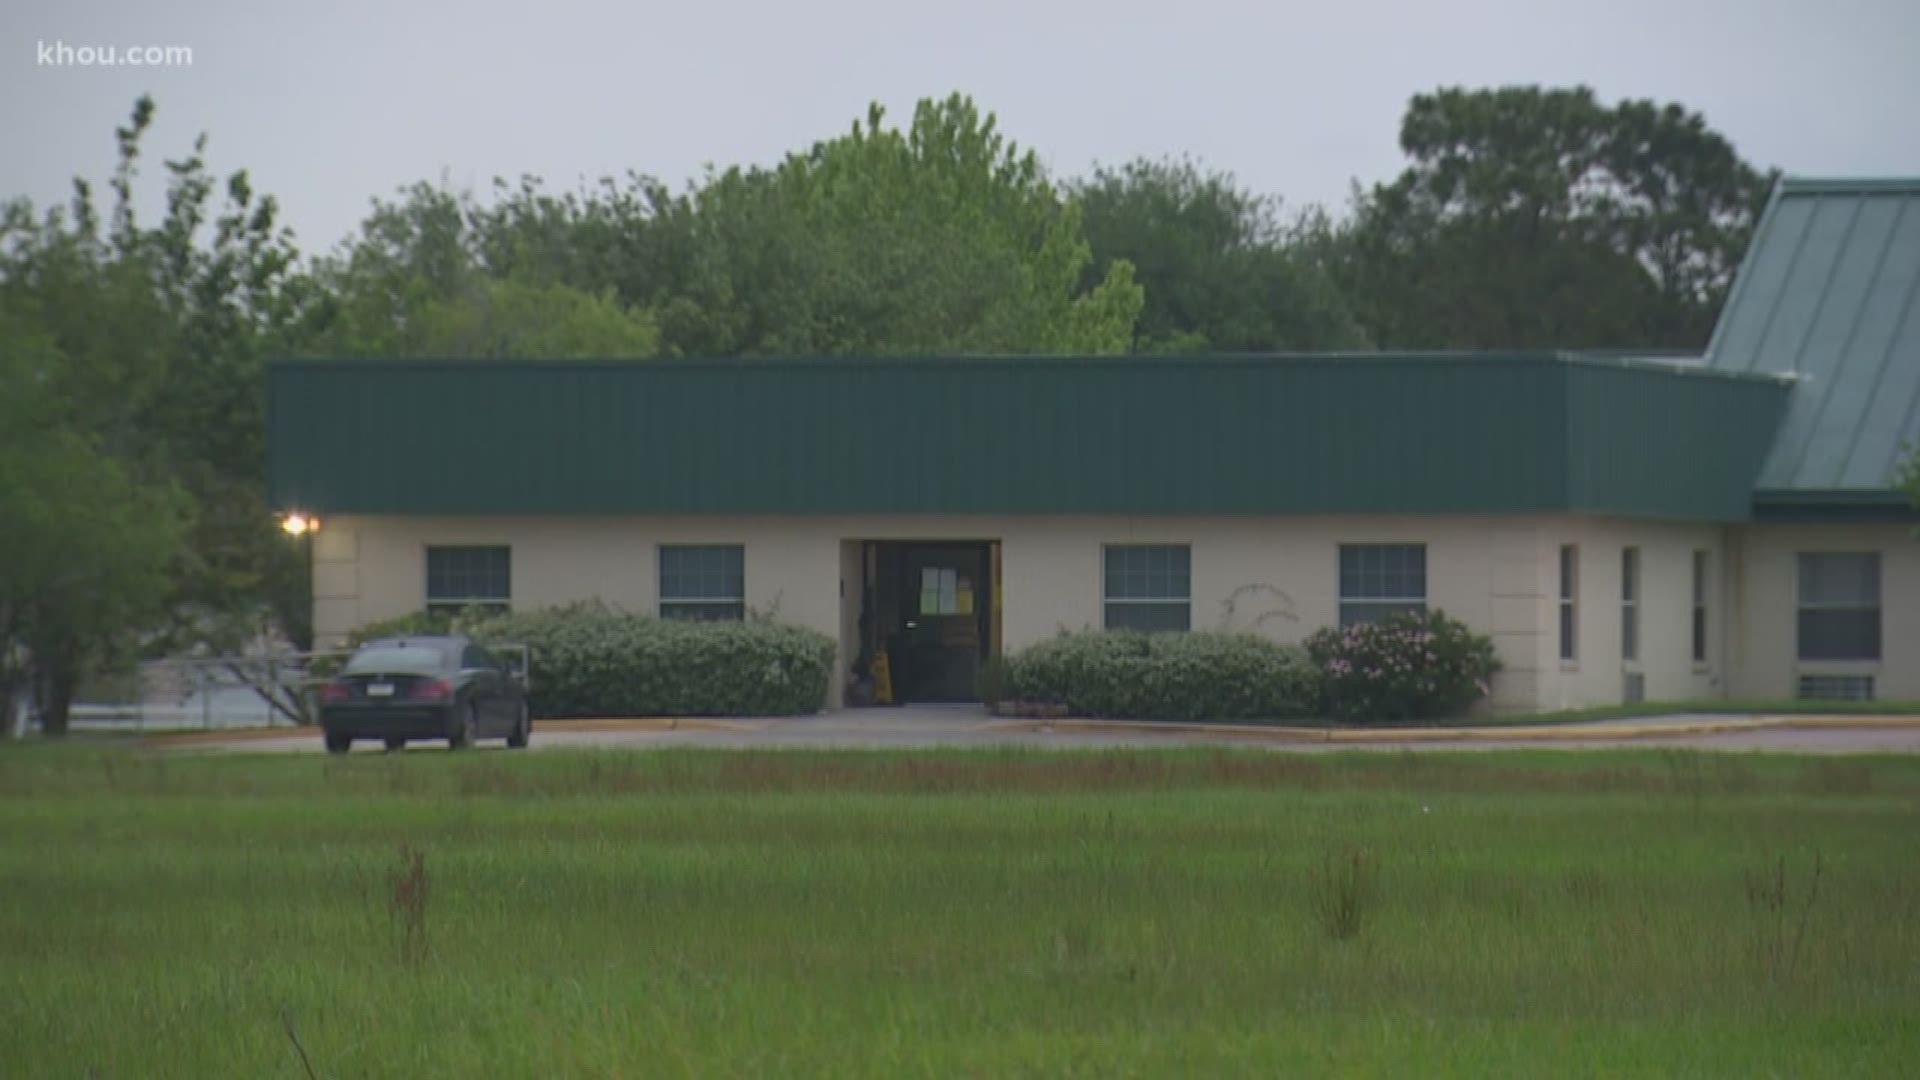 More than 80 people tested positive for COVID-19 at The Resort at Texas City nursing home, the Galveston County Health District announced Friday afternoon.